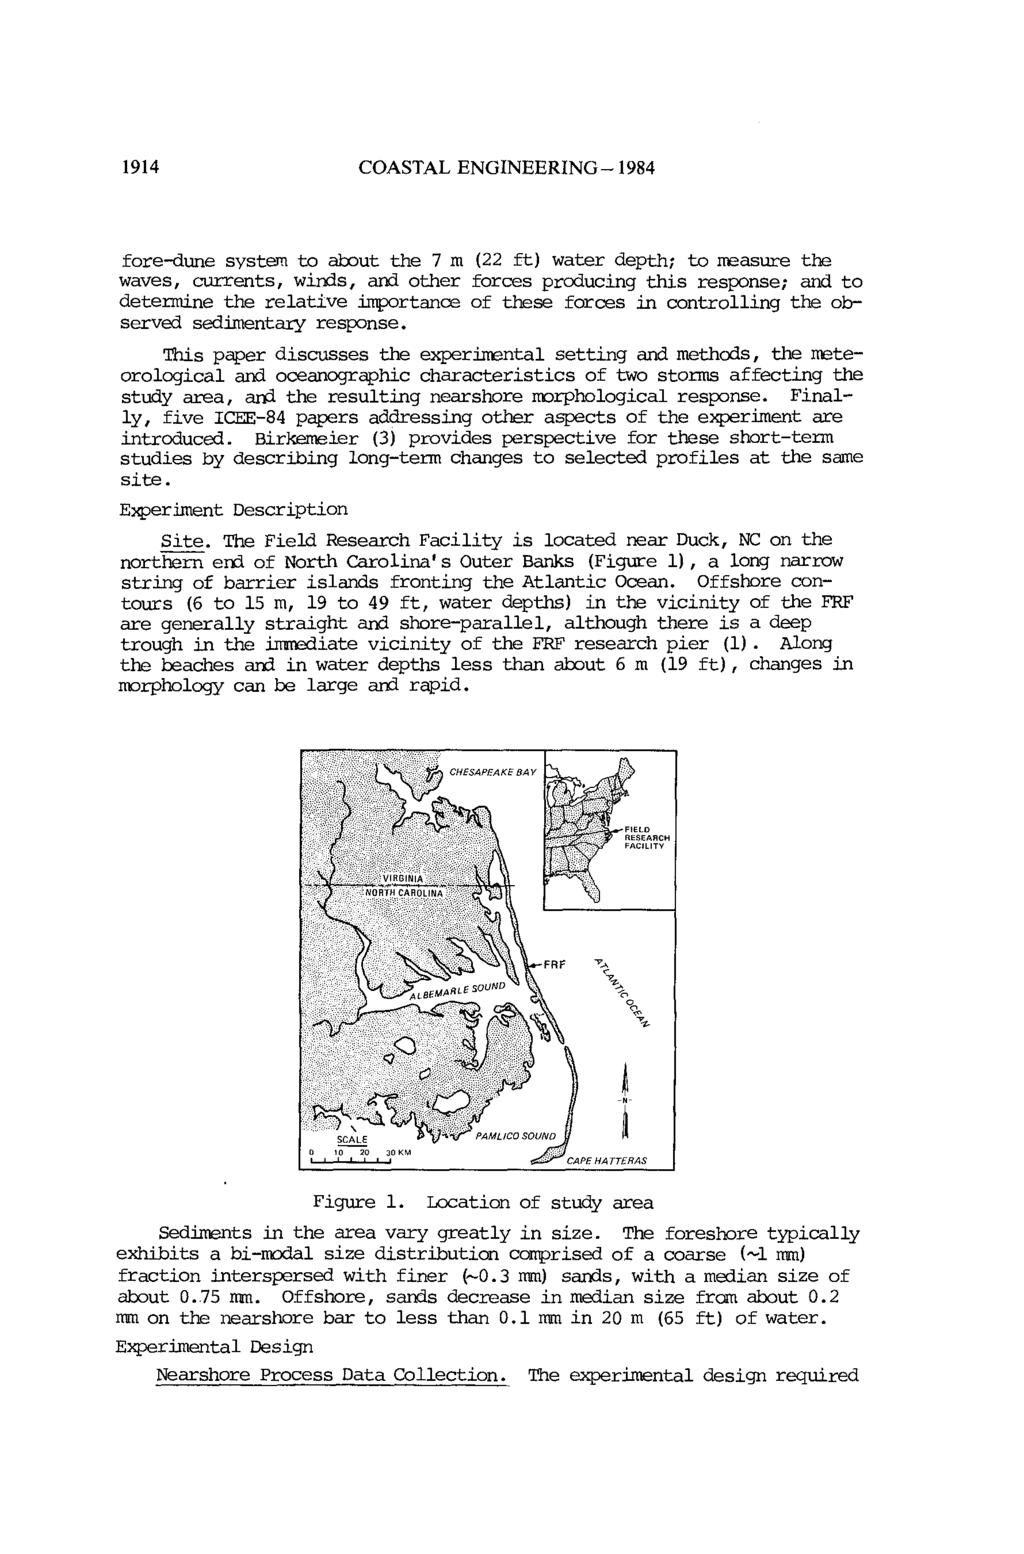 1914 COASTAL ENGINEERING-1984 fore-dune system to about the 7 m (22 ft) water depth; to measure the waves, currents, winds, and other forces producing this response; and to determine the relative